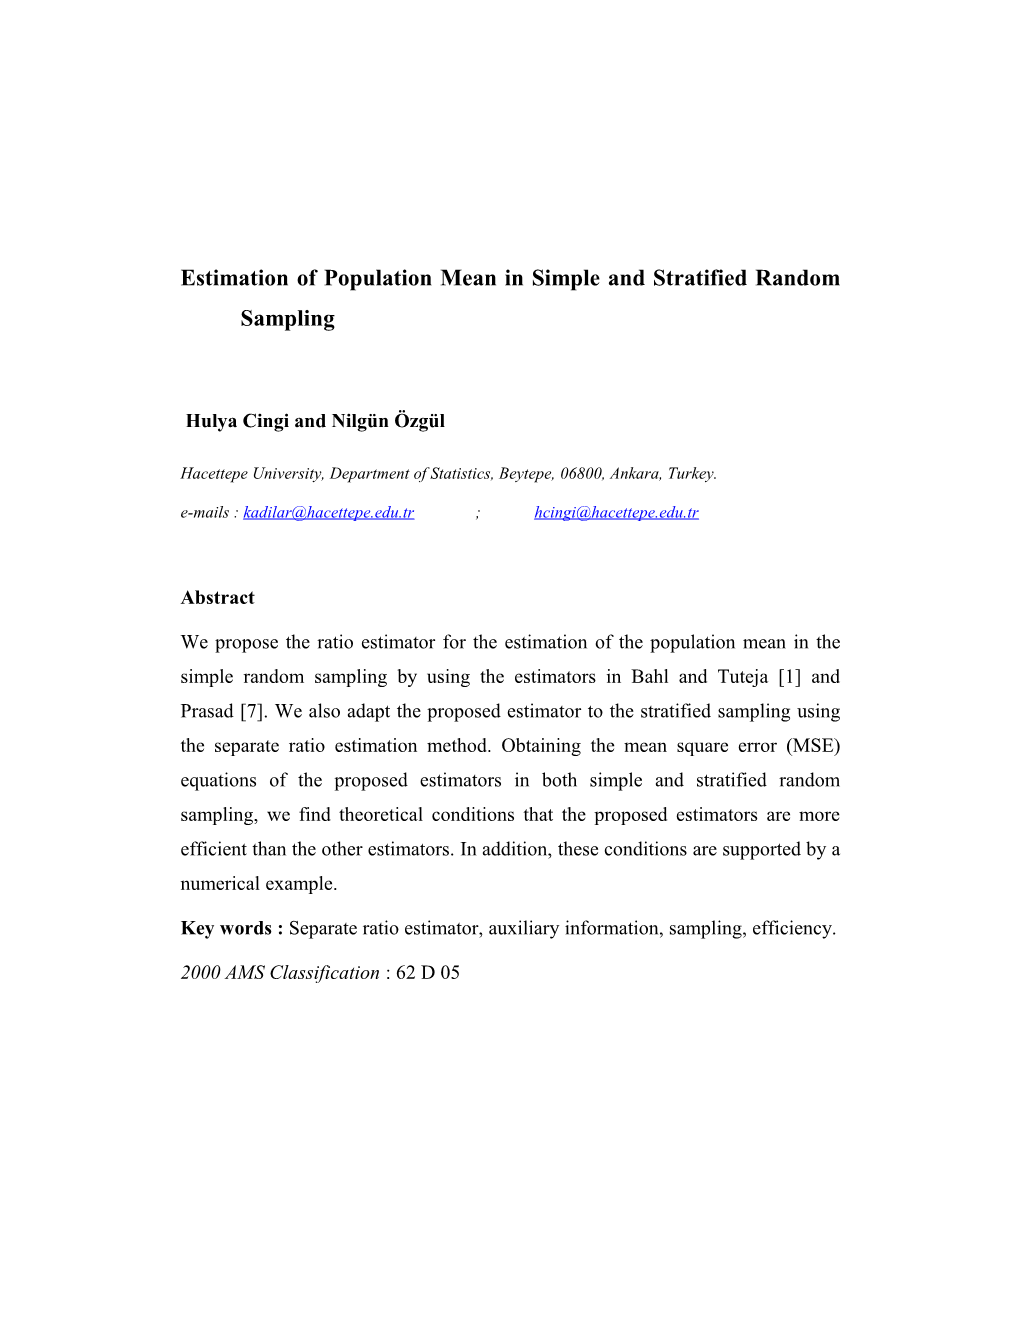 Estimation of Population Mean in Simple and Stratified Sampling